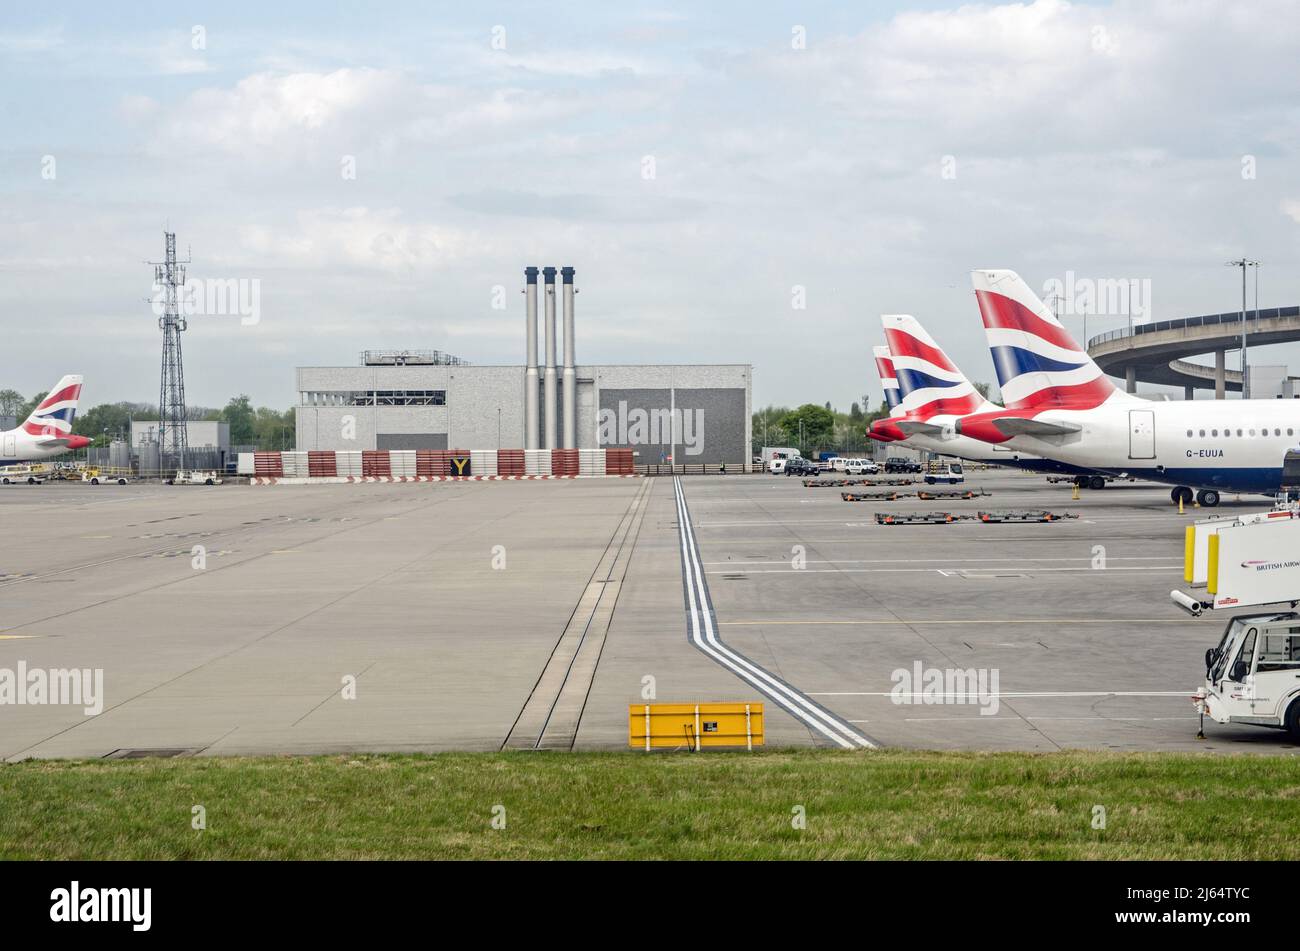 London, UK - April 19, 2022: View of an industrial support building complete with chimneys next to the main Terminal 5 buildings with British Airways Stock Photo